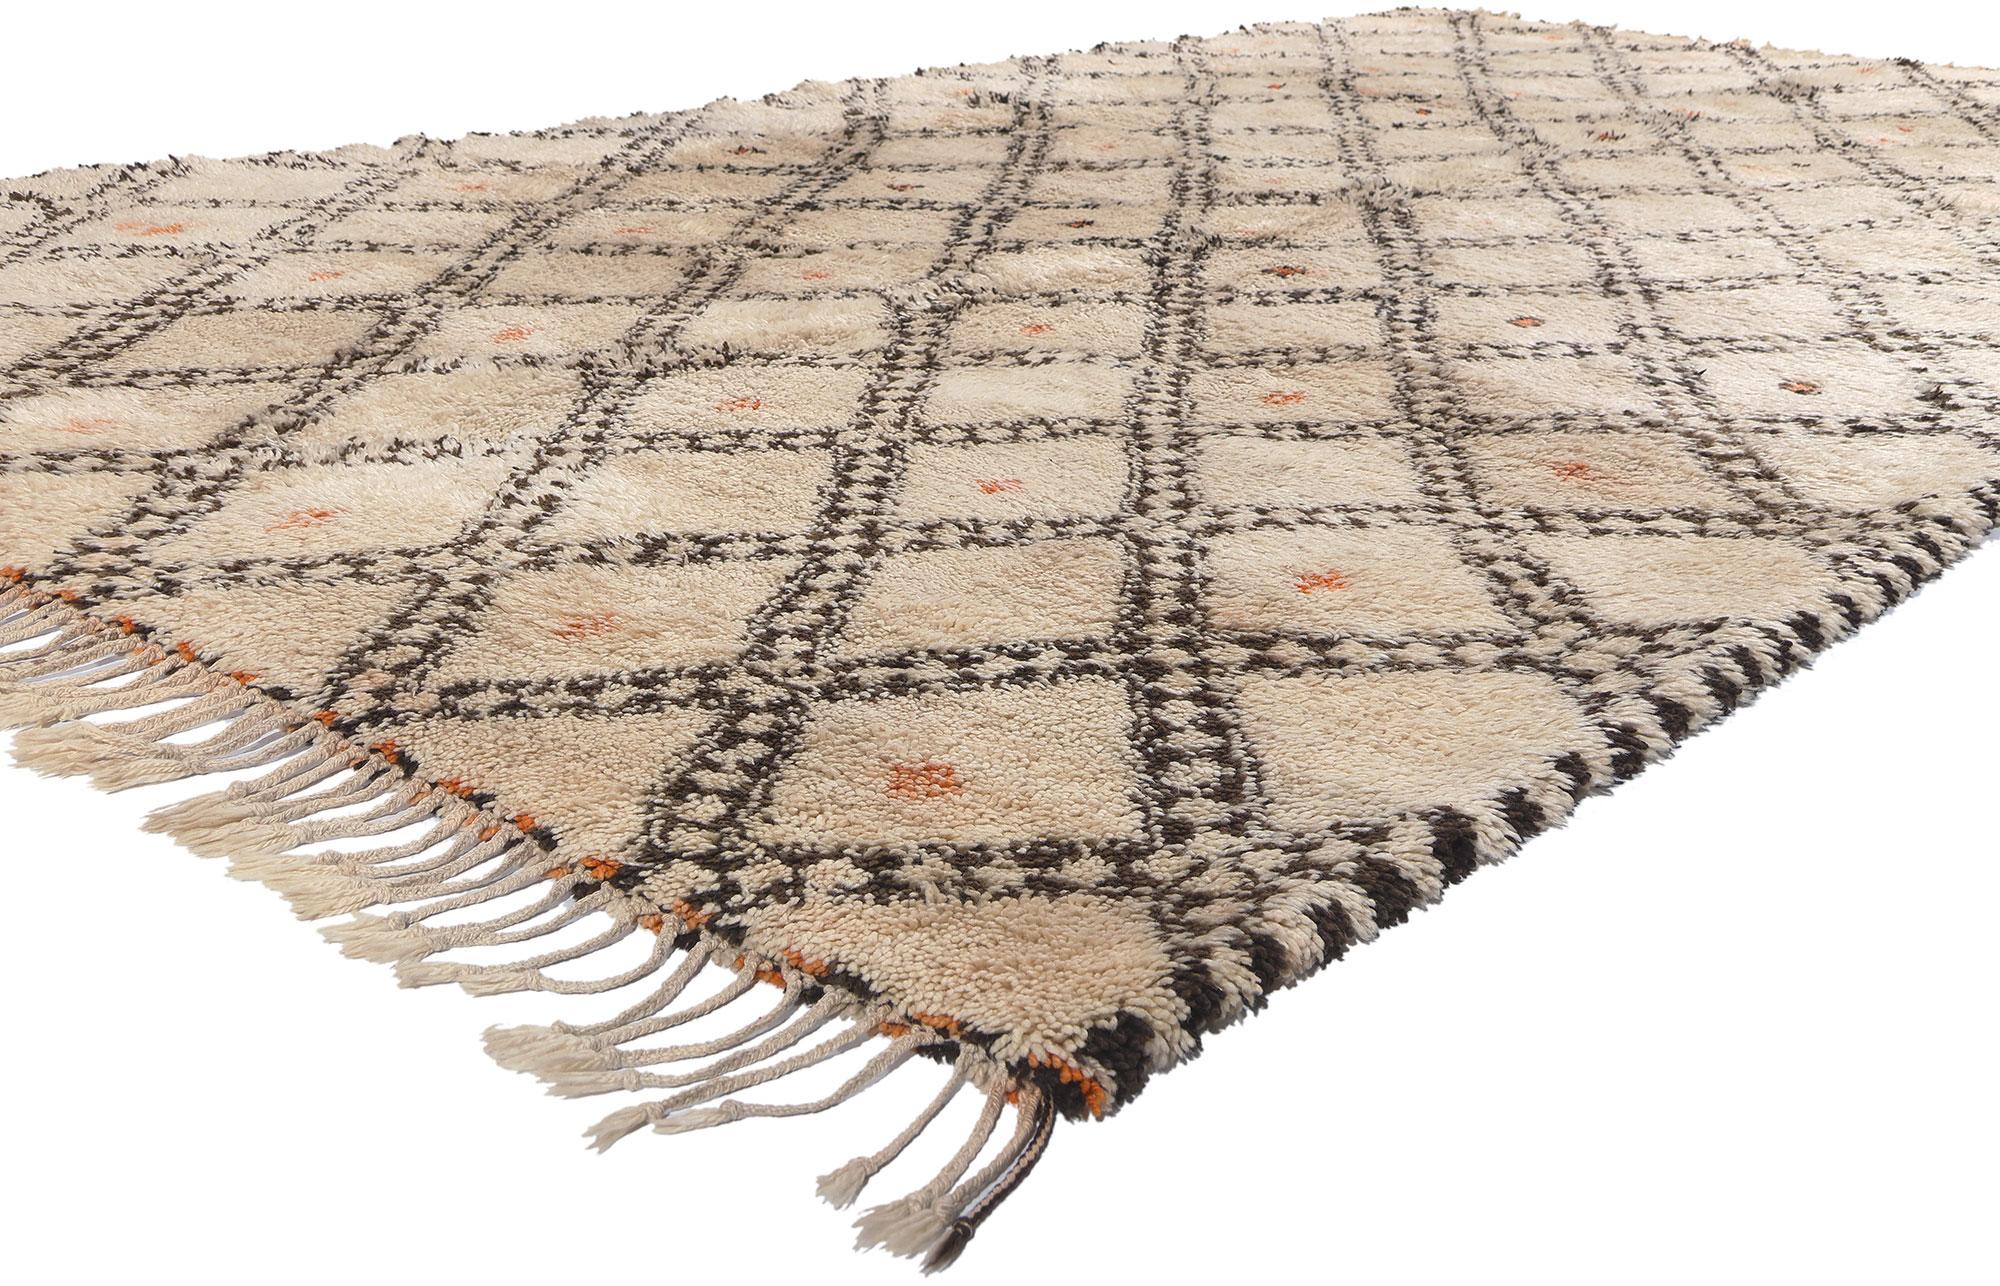 20852 Vintage Moroccan Beni Ourain Rug, 06'08 x 12'02. Mid-Century Modern design seamlessly intertwines with tribal allure in this hand knotted wool vintage Moroccan Beni Ouarain rug. The diamond trellis and subdued hues woven into this piece